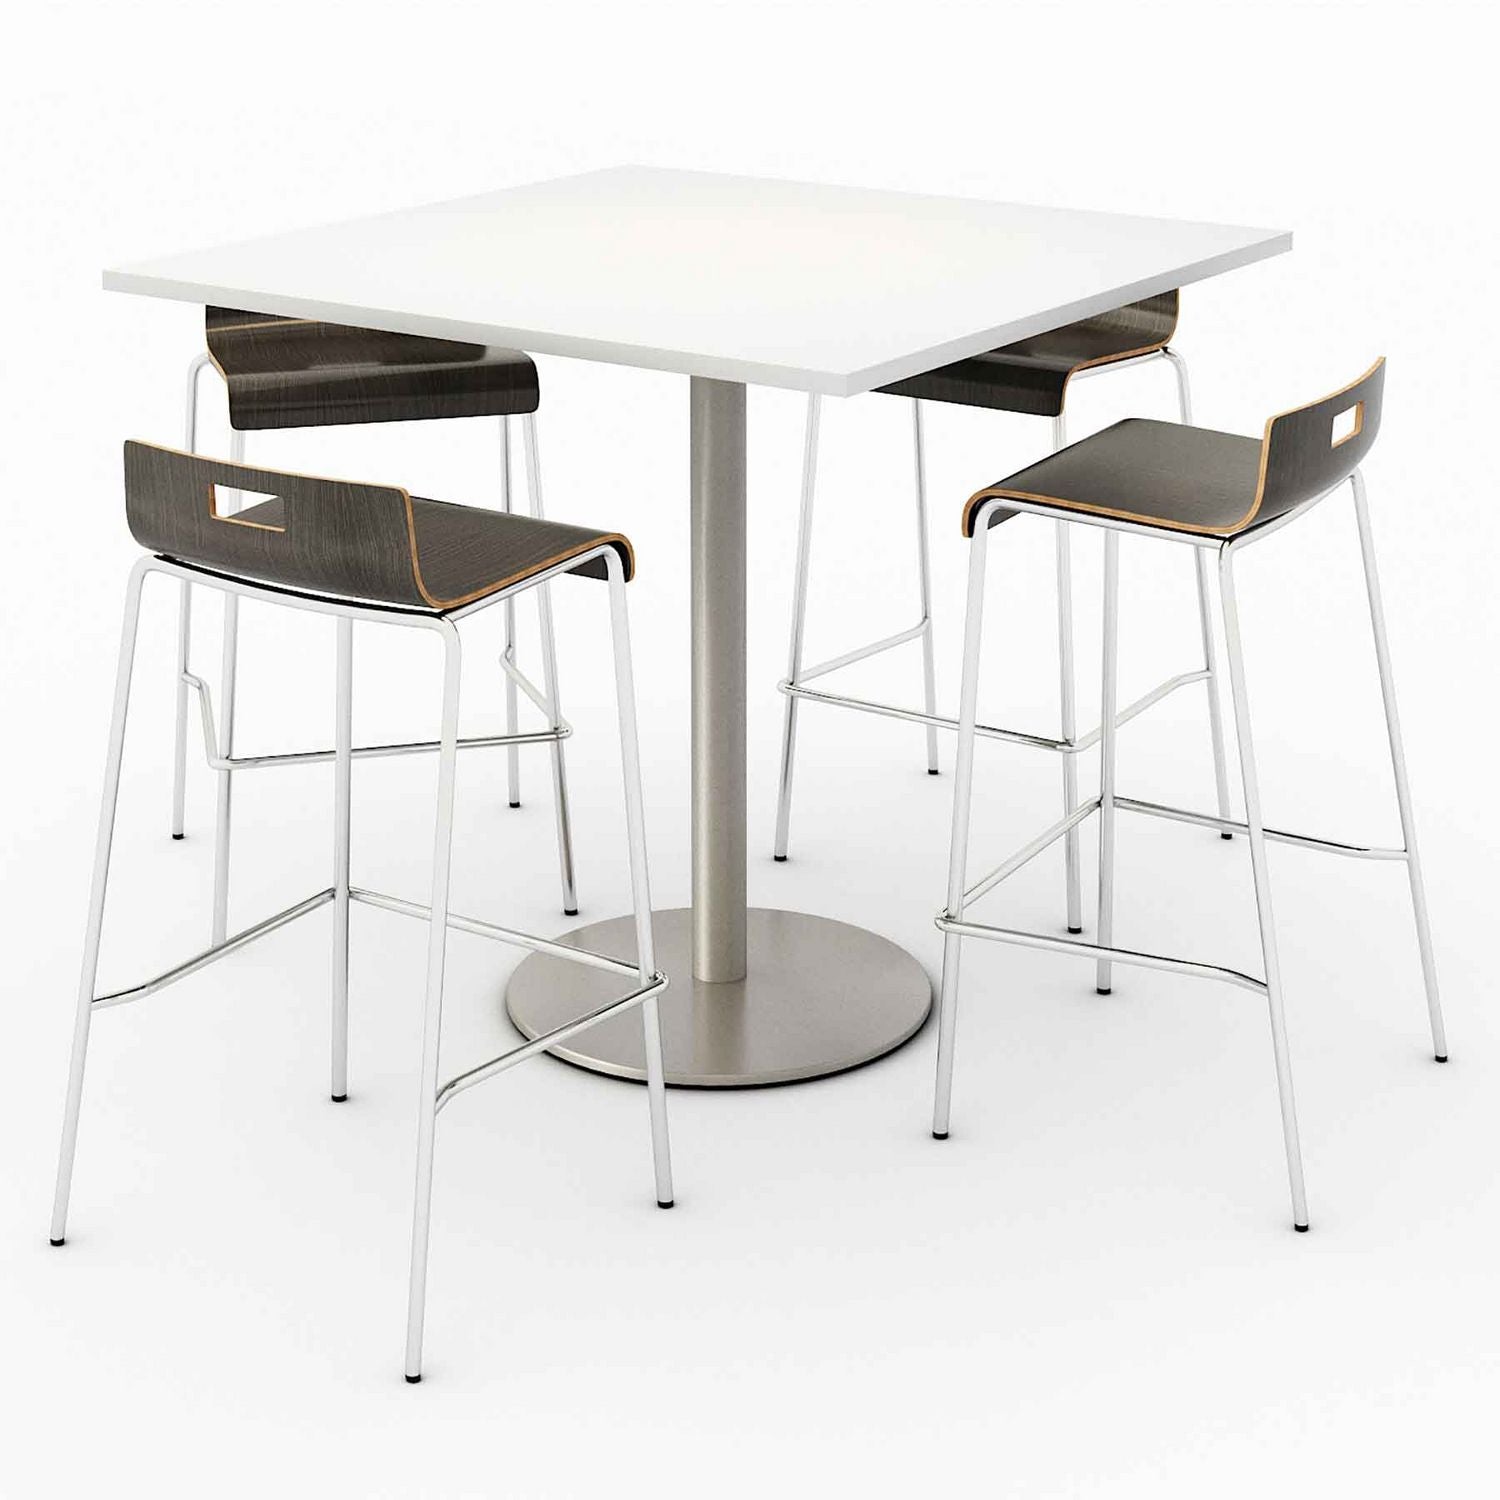 pedestal-bistro-table-with-four-espresso-jive-series-barstools-square-36x36x41-designer-white-ships-in-4-6-business-days_kfi811774039901 - 1